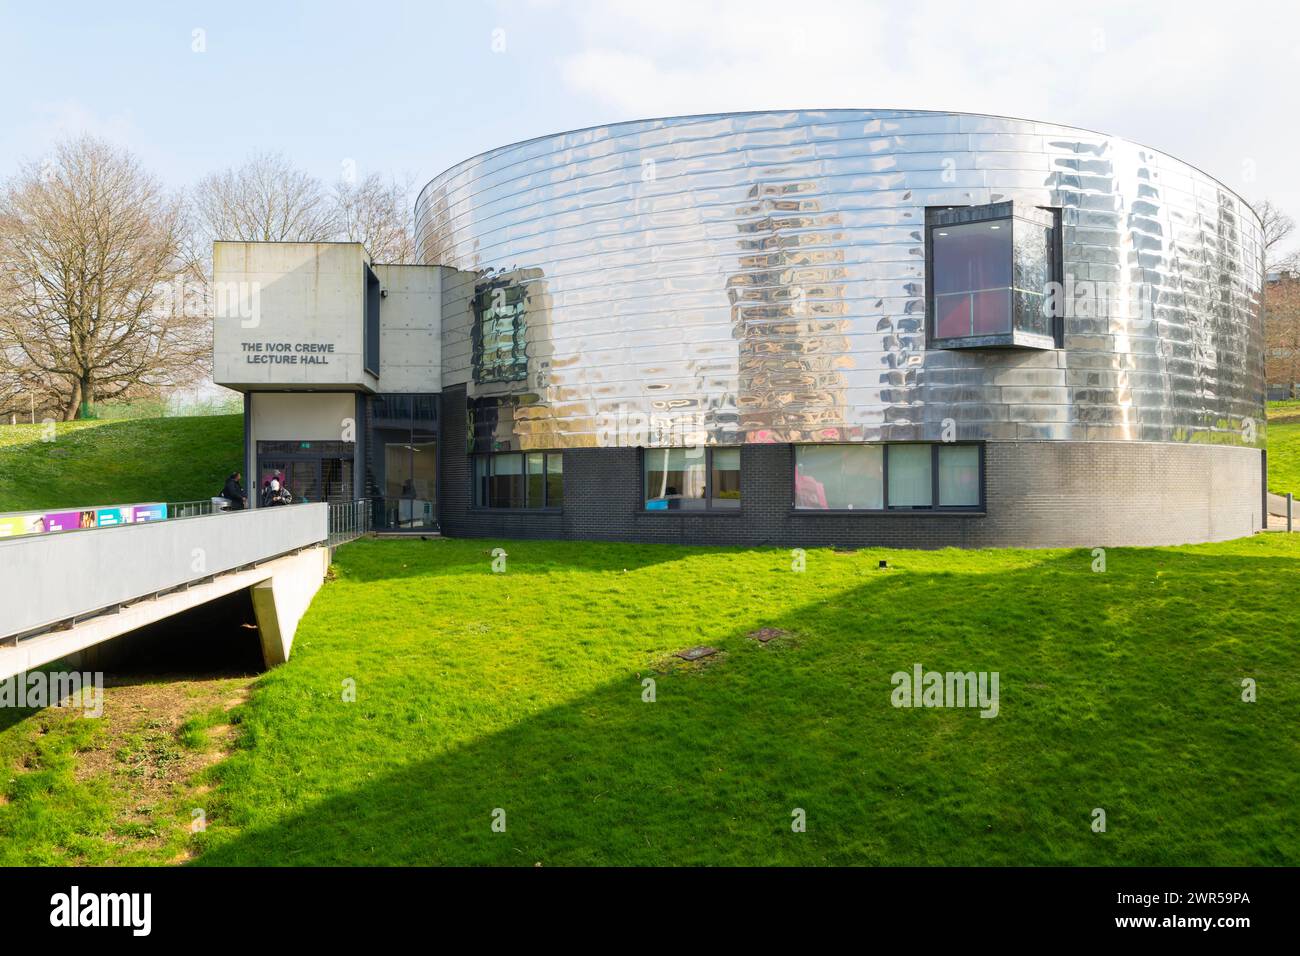 The Ivor Crewe Lecture Hall building, University of Essex, Colchester, Essex, England, UK Stock Photo